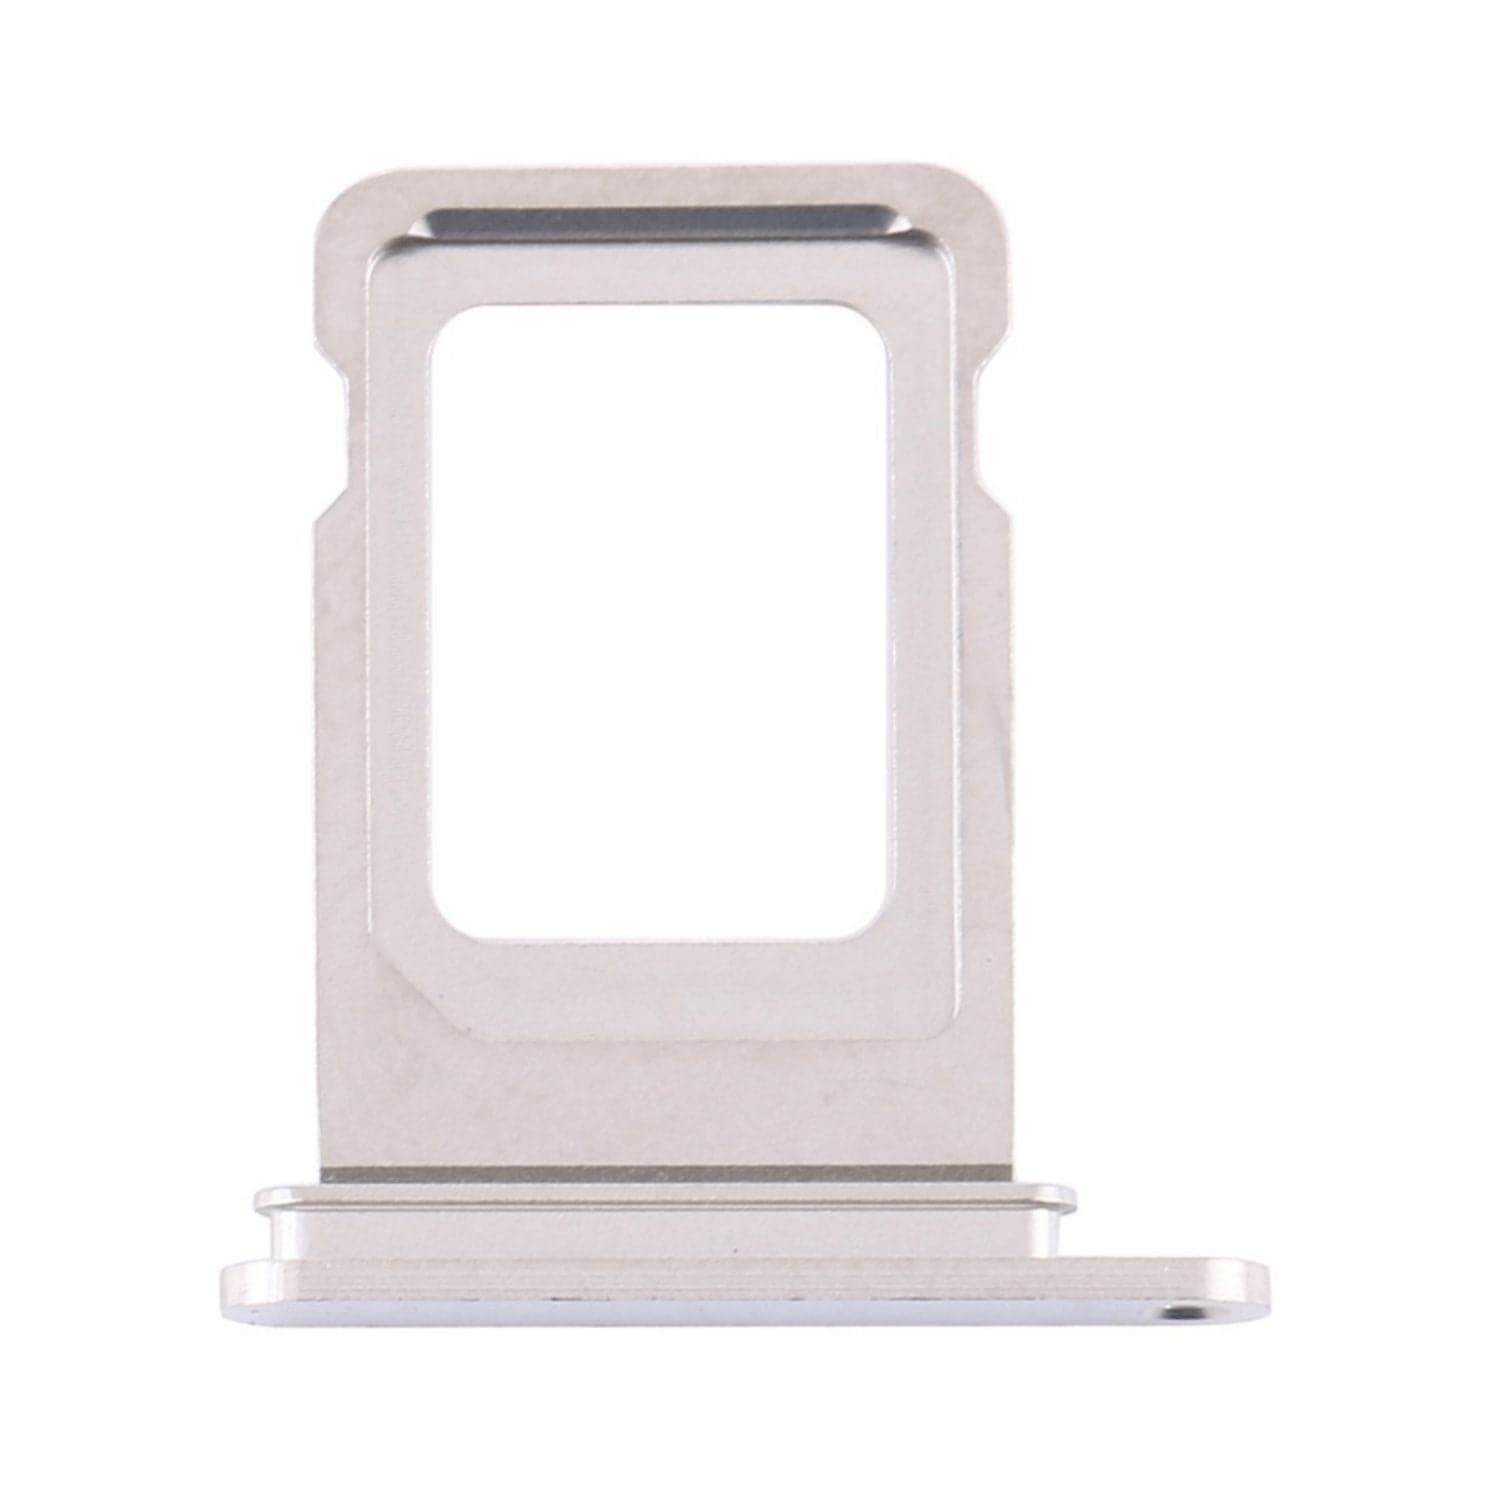 Sim Tray for iPhone 12 Pro / 12 Pro Max Silver